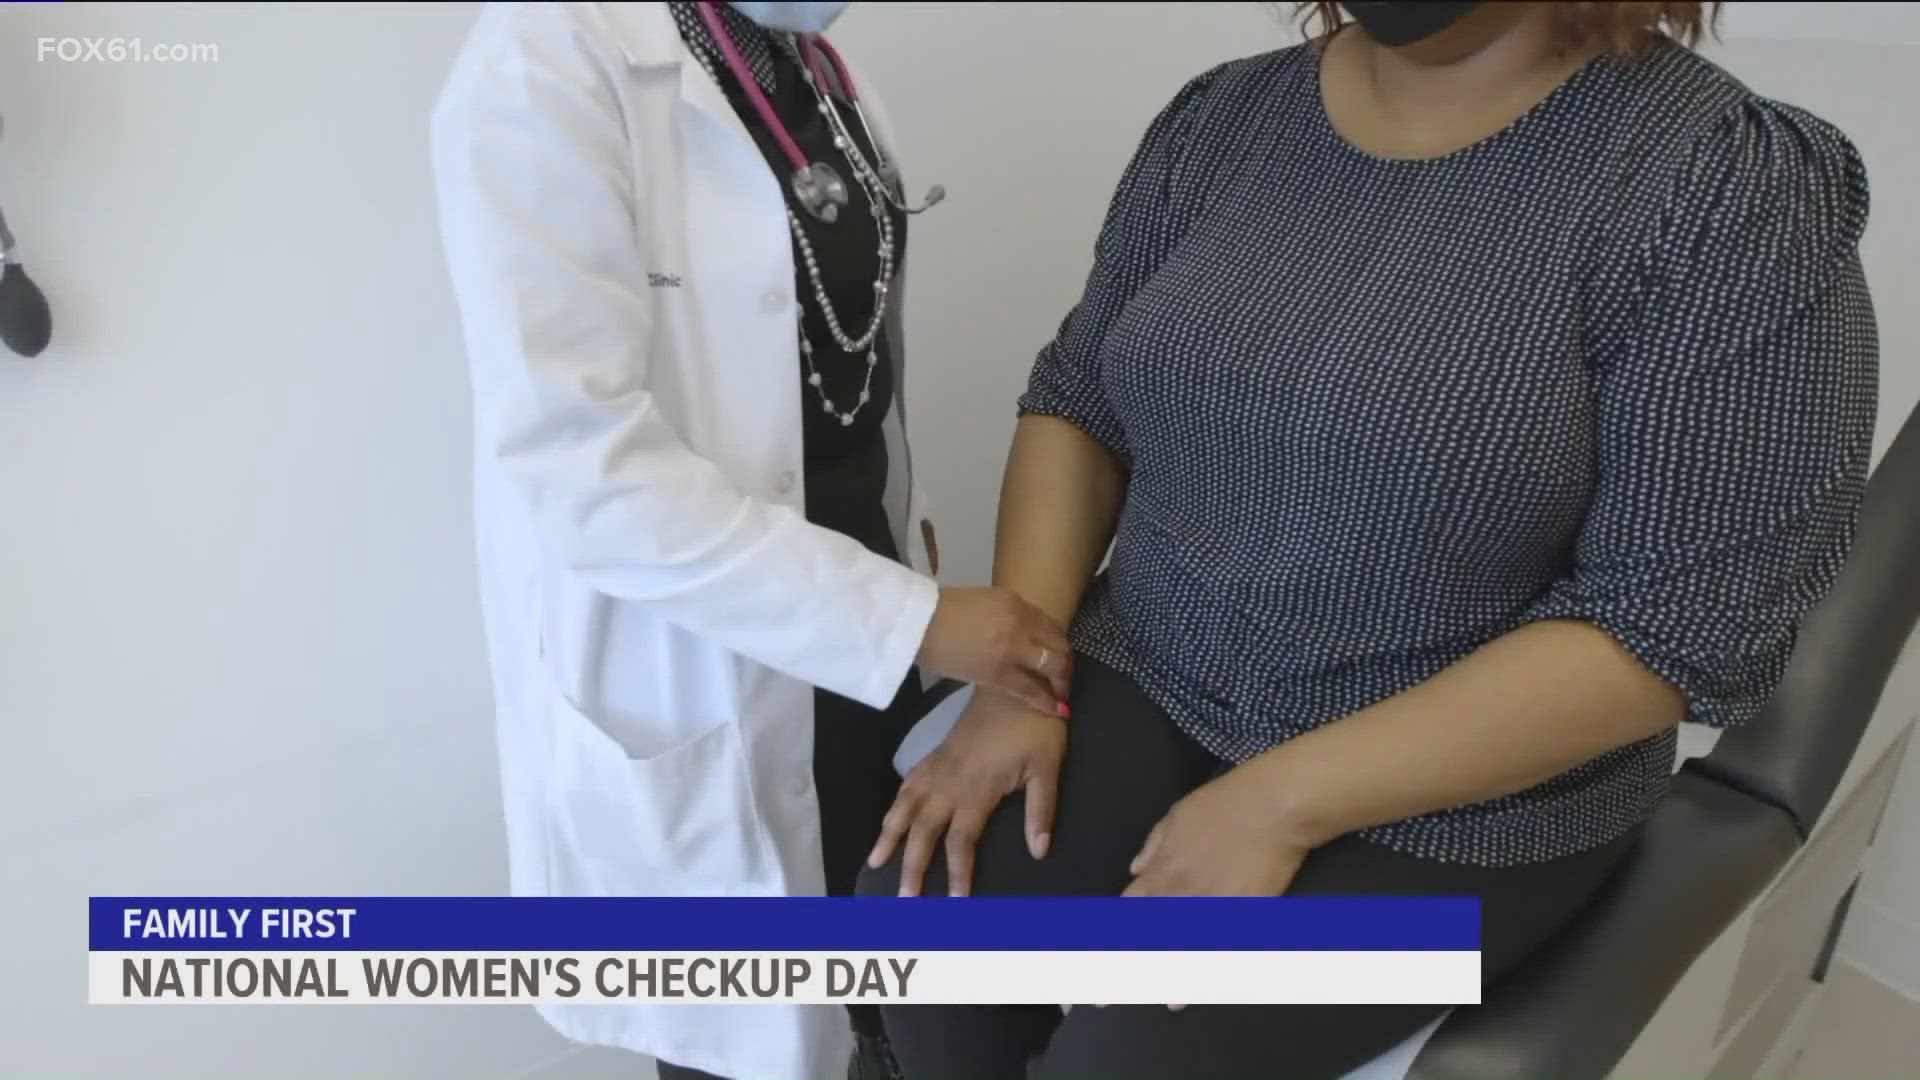 Dr. Jamie Shawver, a primary care physician in Connecticut, explains the importance of women keeping track of their health.